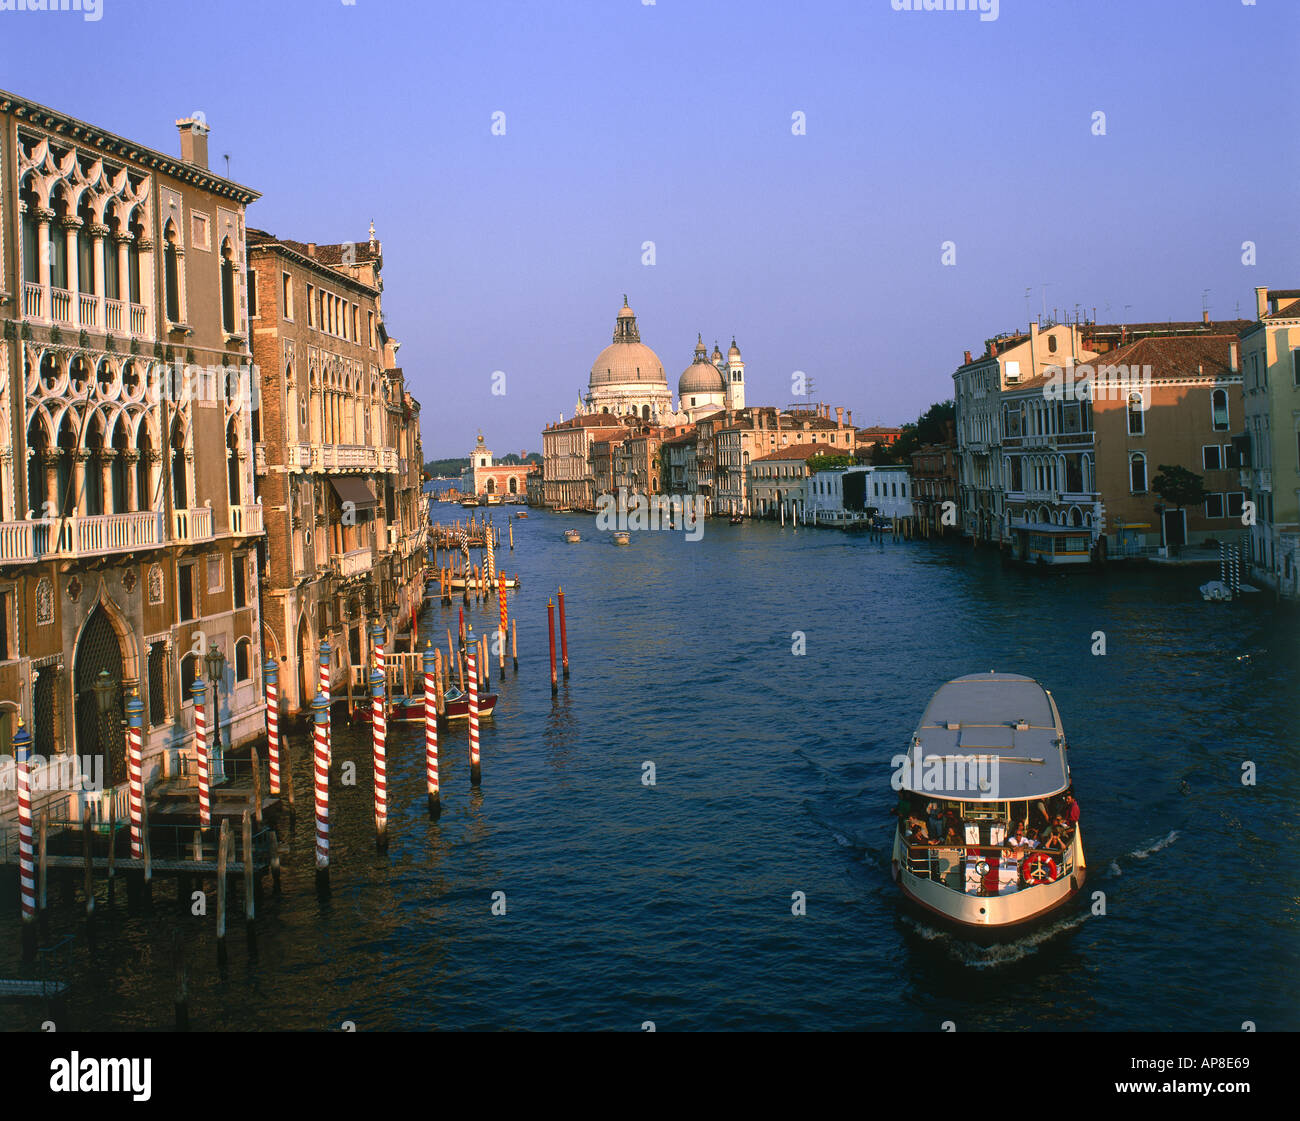 Tourists on boat in canal, Grand Canal, Venice, Italy Stock Photo